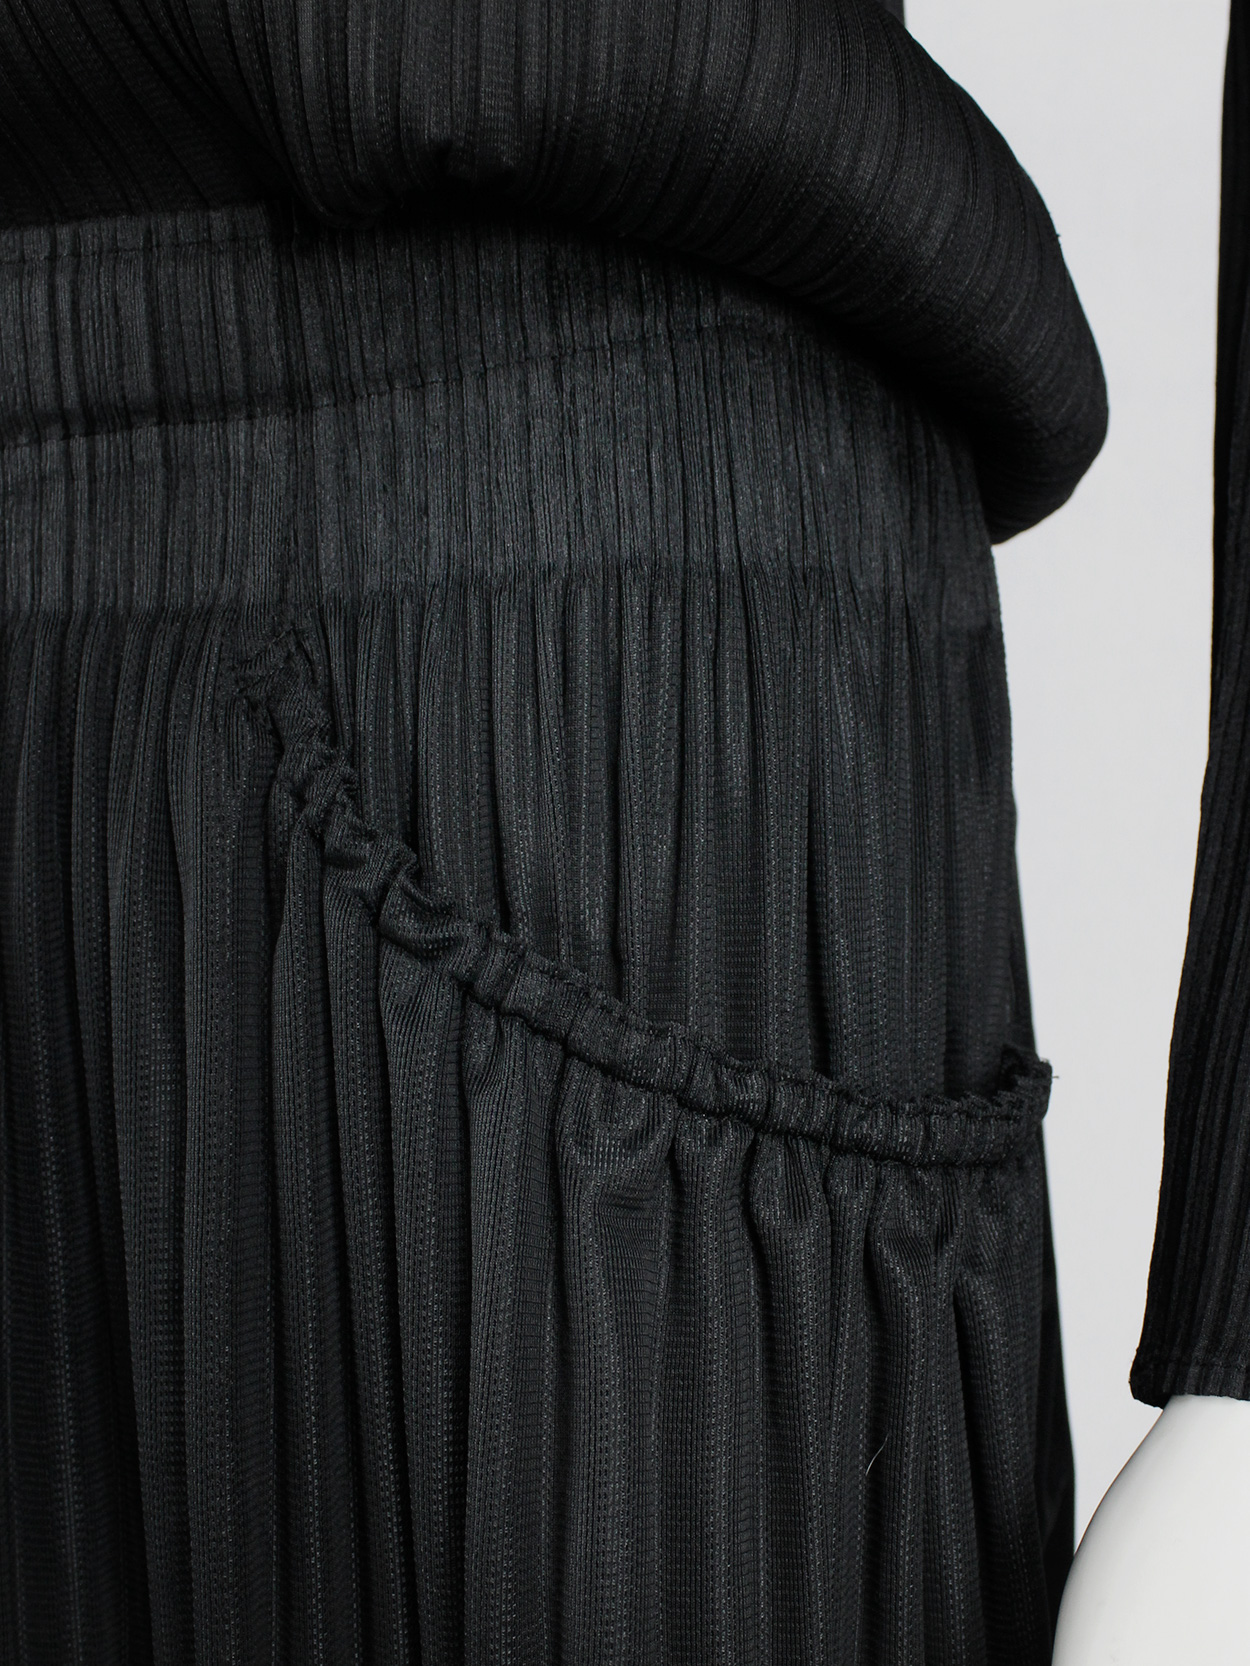 Issey Miyake Pleats Please black bubble skirt with different pleats - V ...